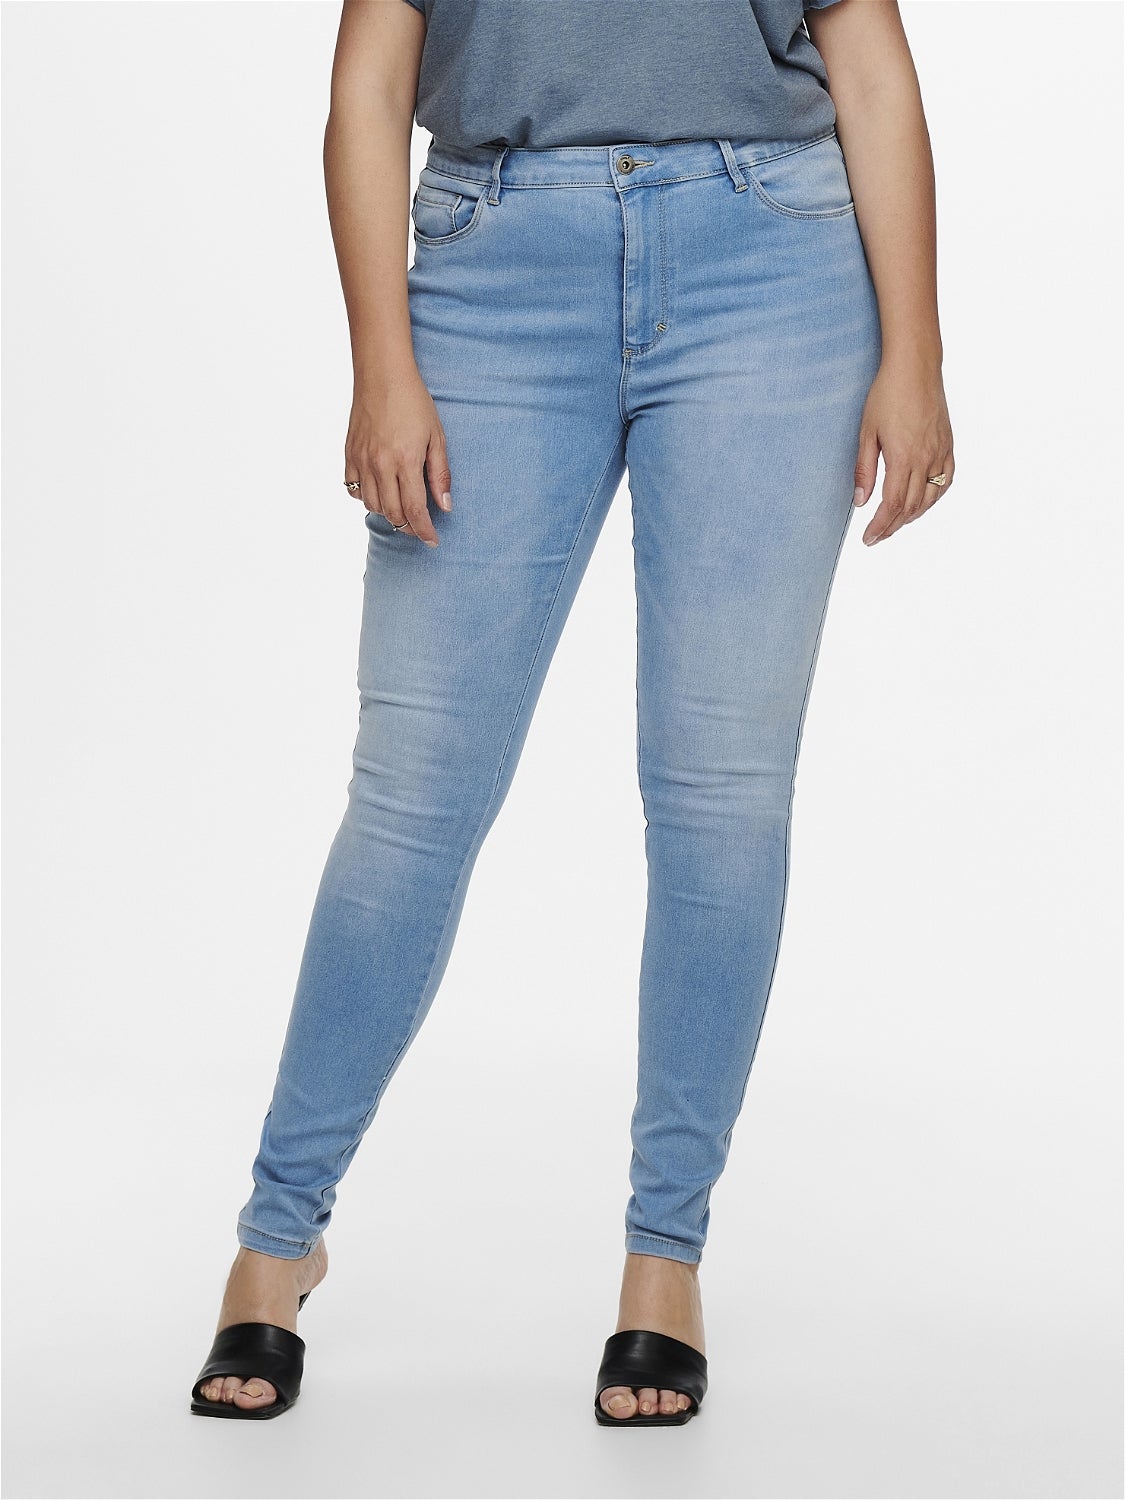 jeans | Curvy CarAugusta hw | Blue Skinny ONLY® Light fit